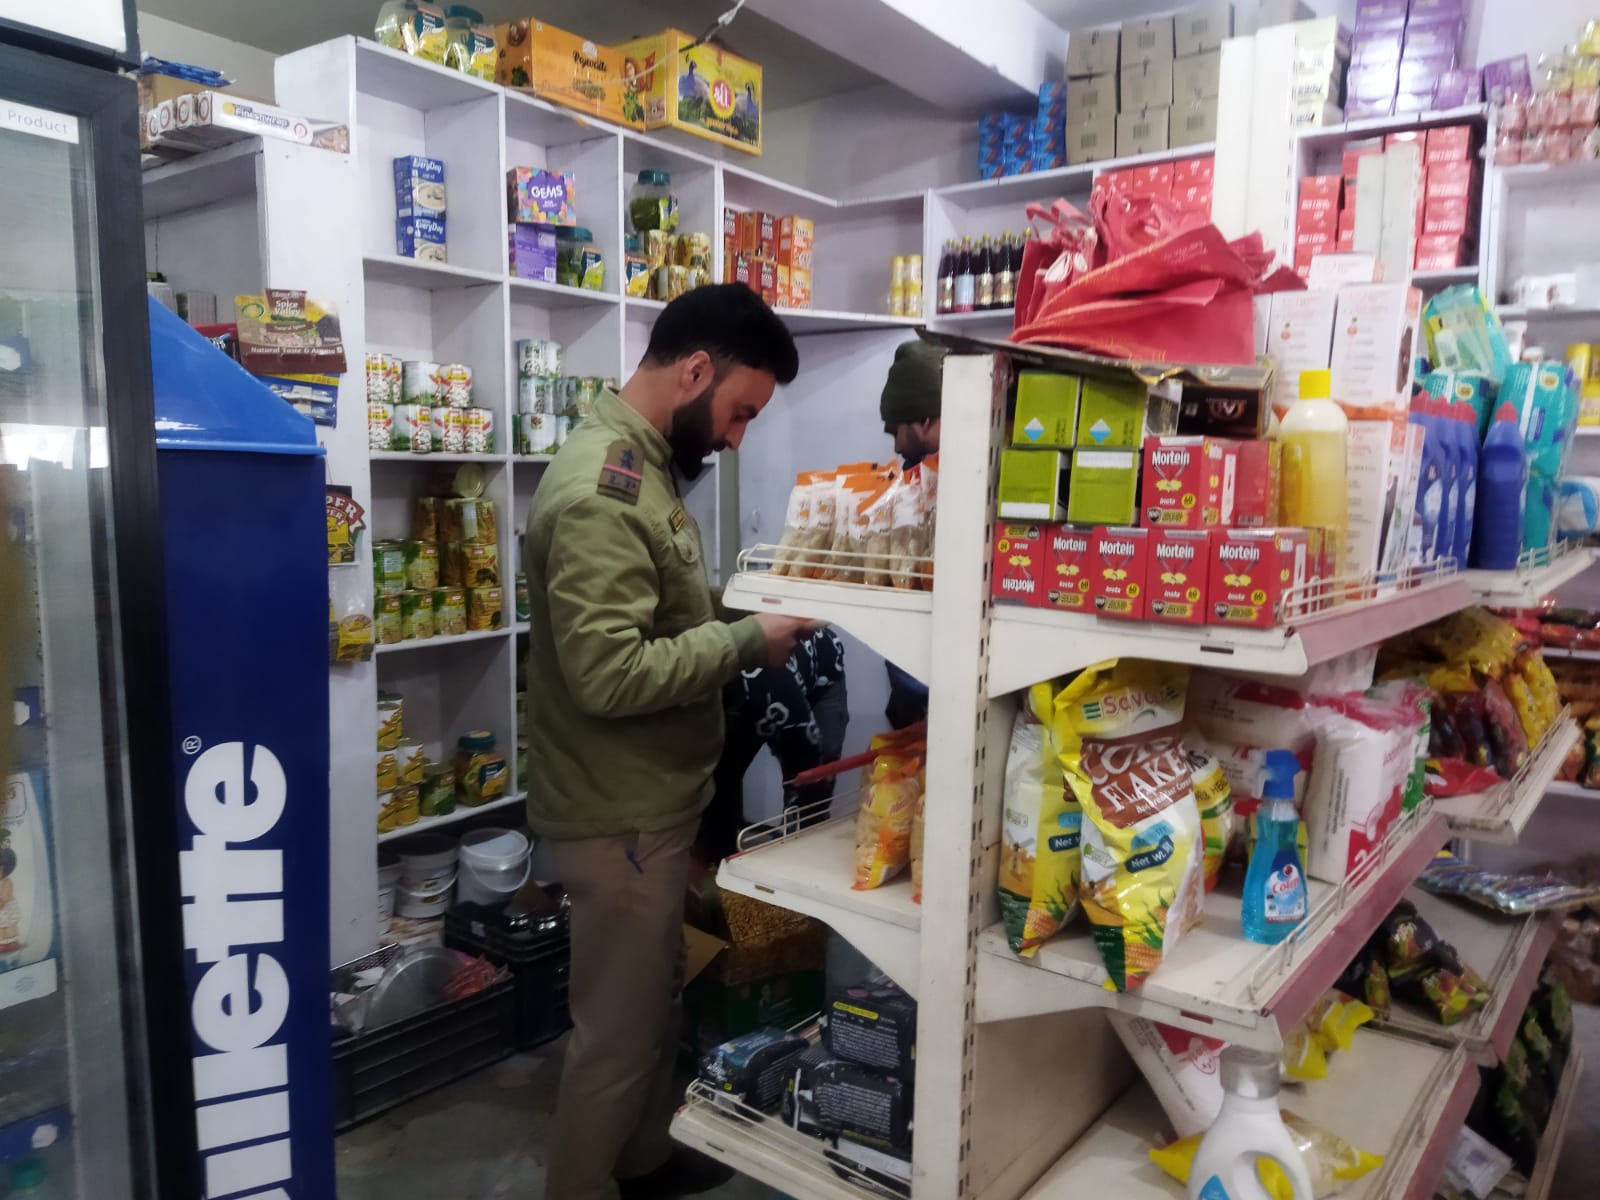 SDM, Khaltse directs checking of Yadoo General Store for expired items in Leh